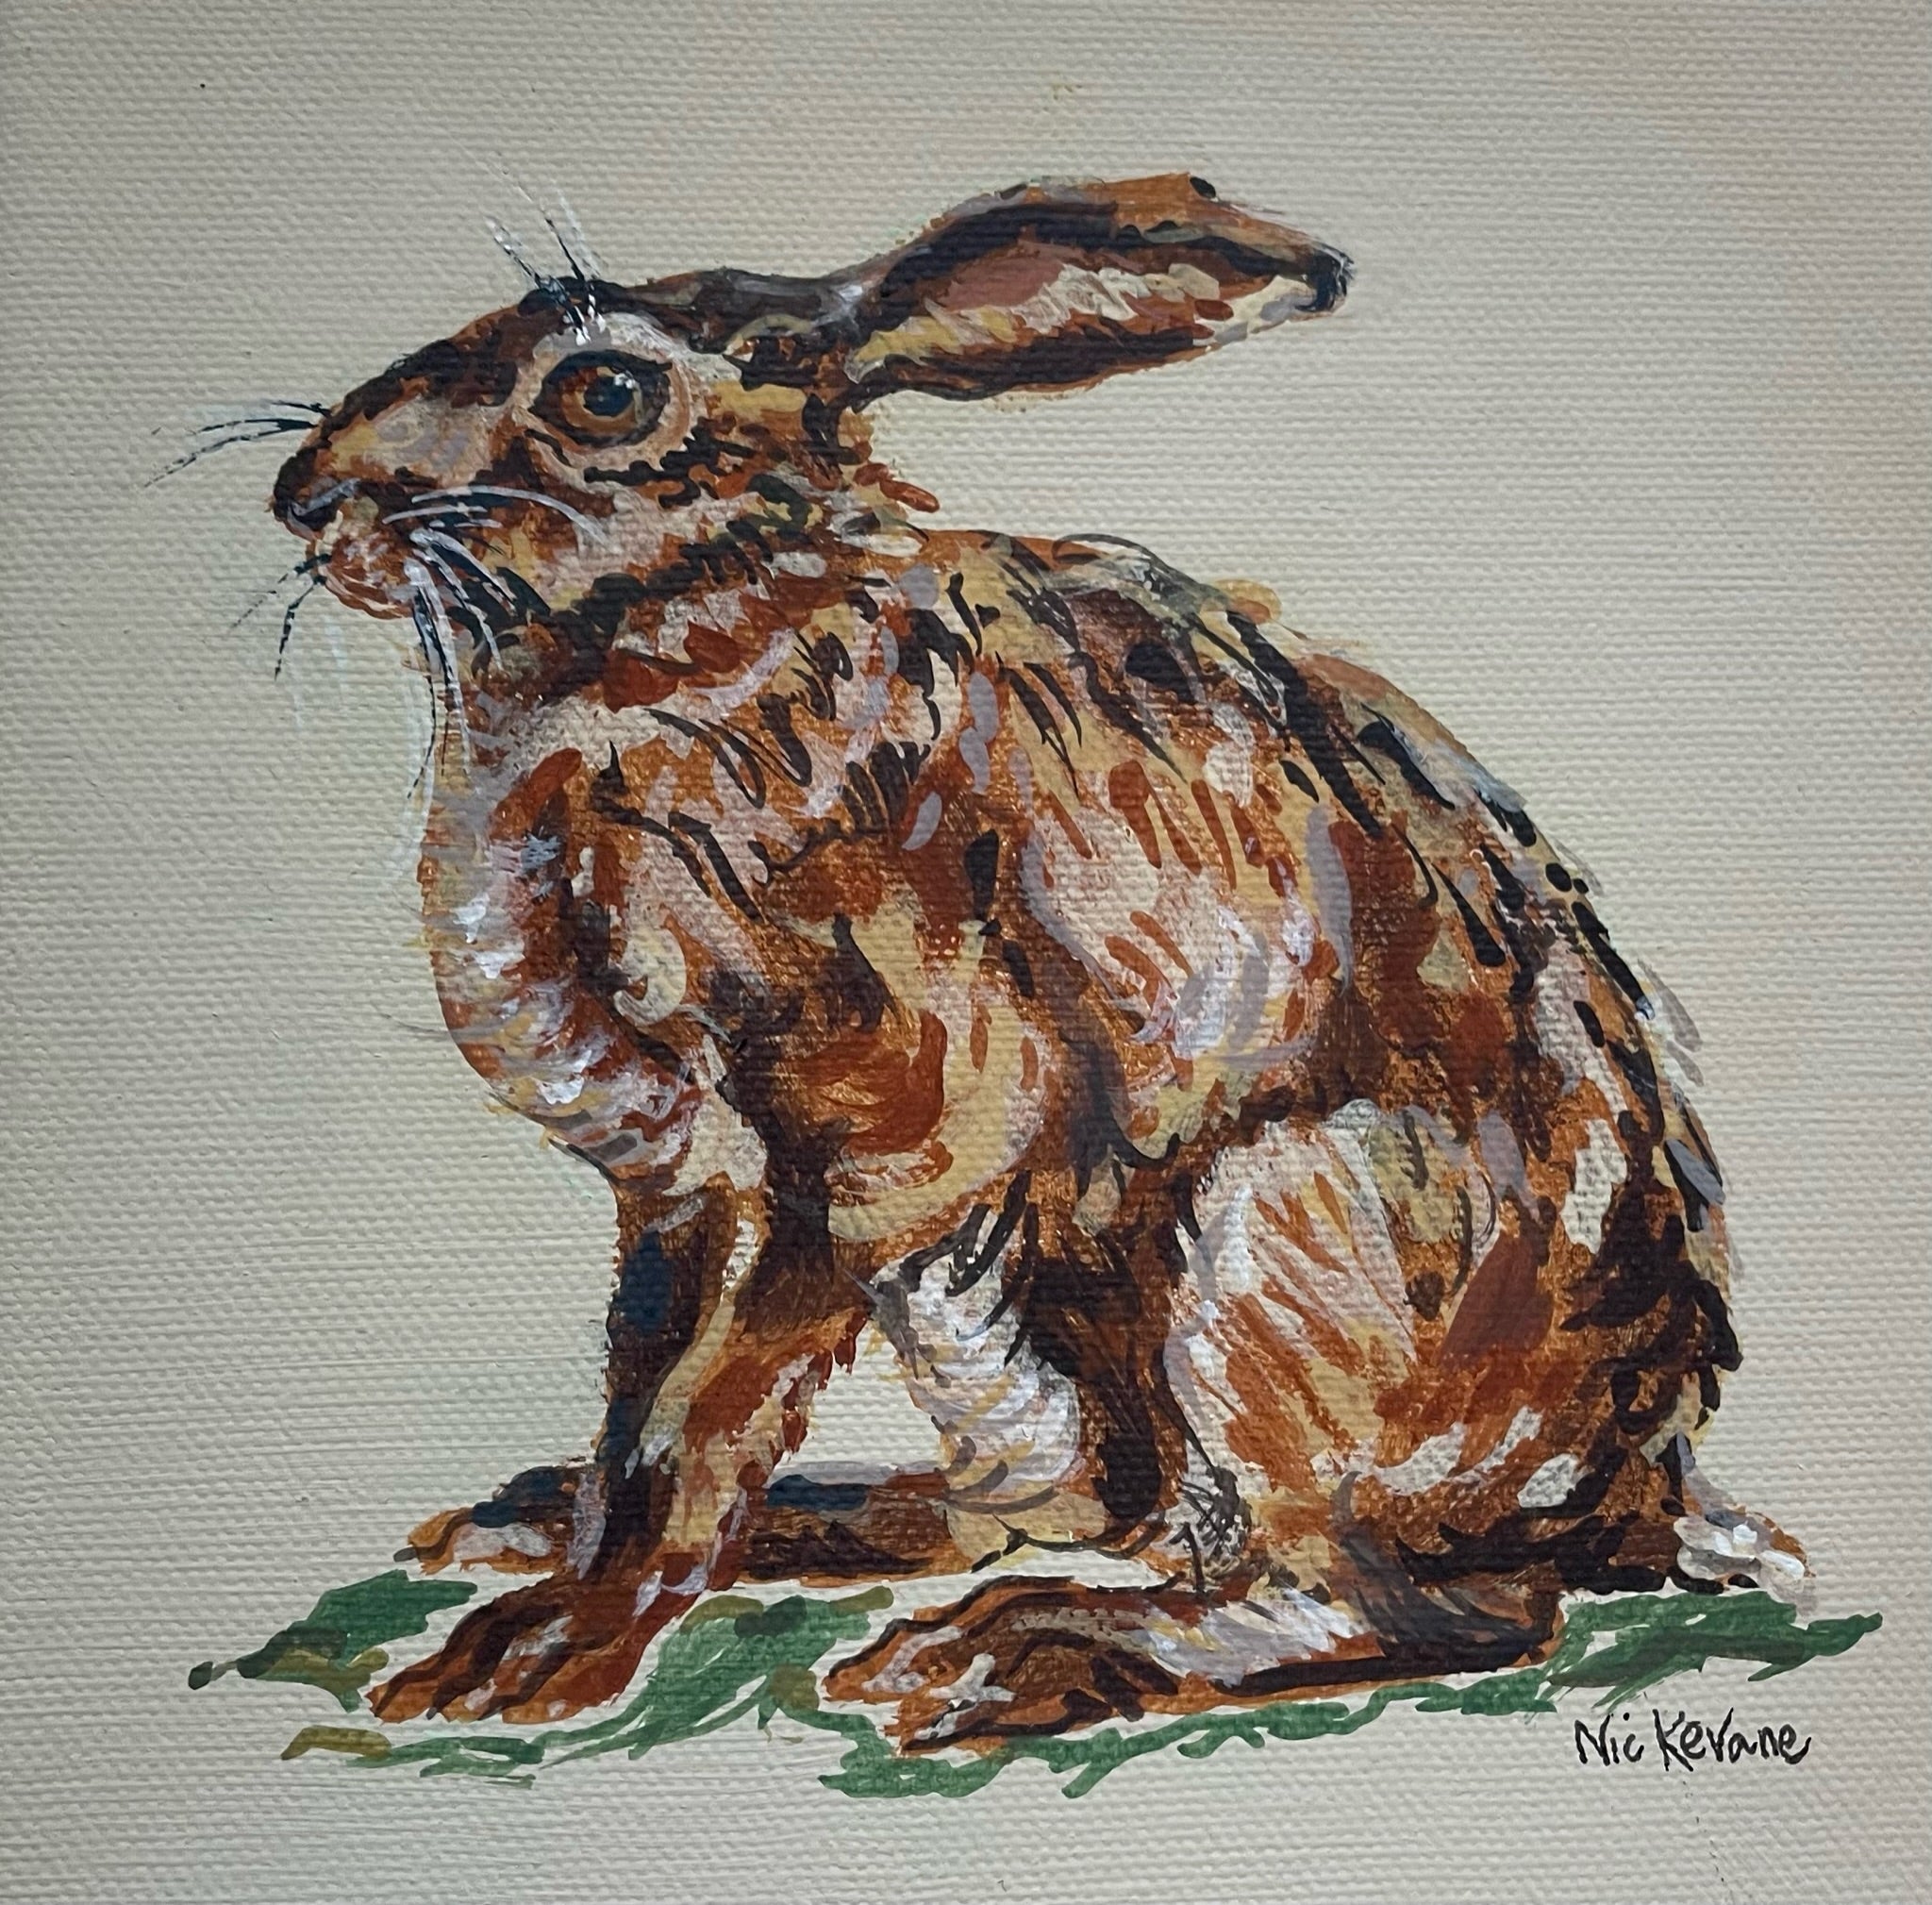 Sitting Hare - 15cm x 15cm mini paintings depicting various countryside subjects.